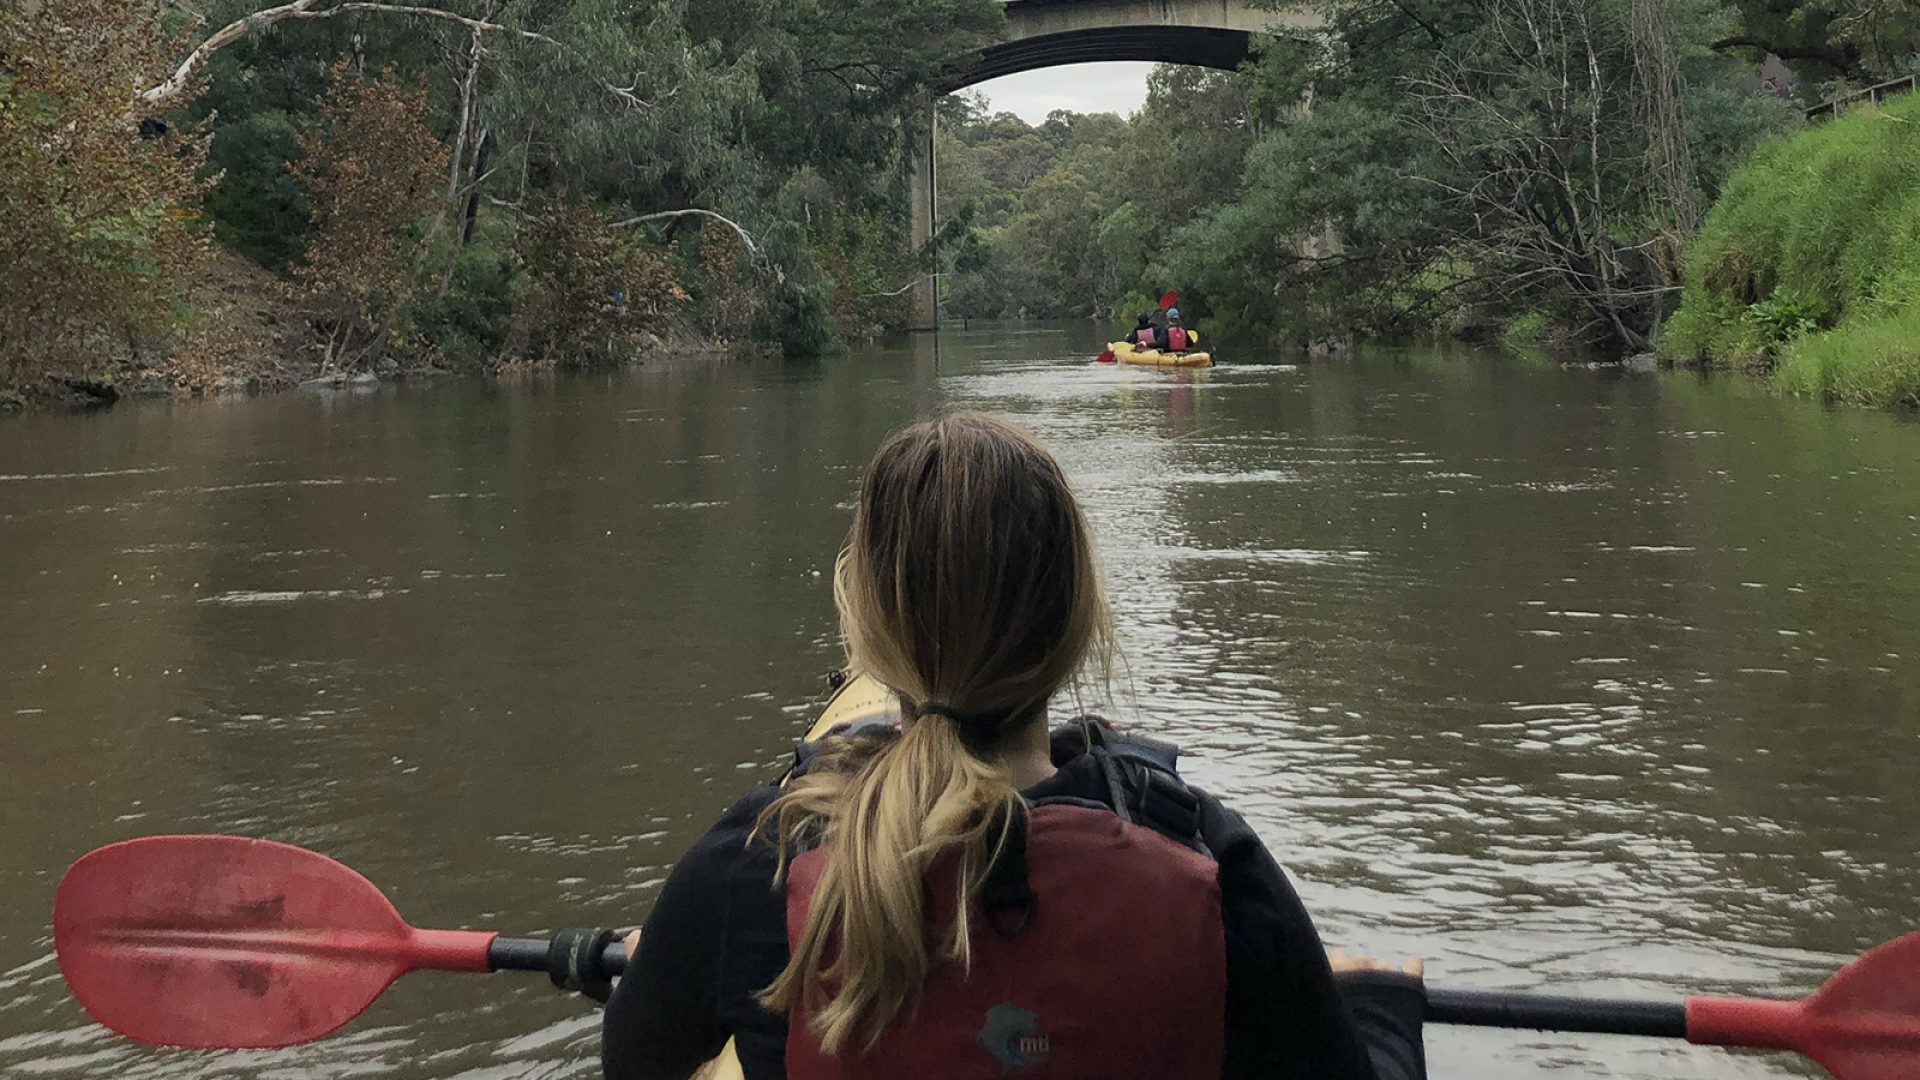 A person with long hair in a ponytail floats in a kayak in the middle of a river. There is a bridge in the distance at the top of the image and trees either side